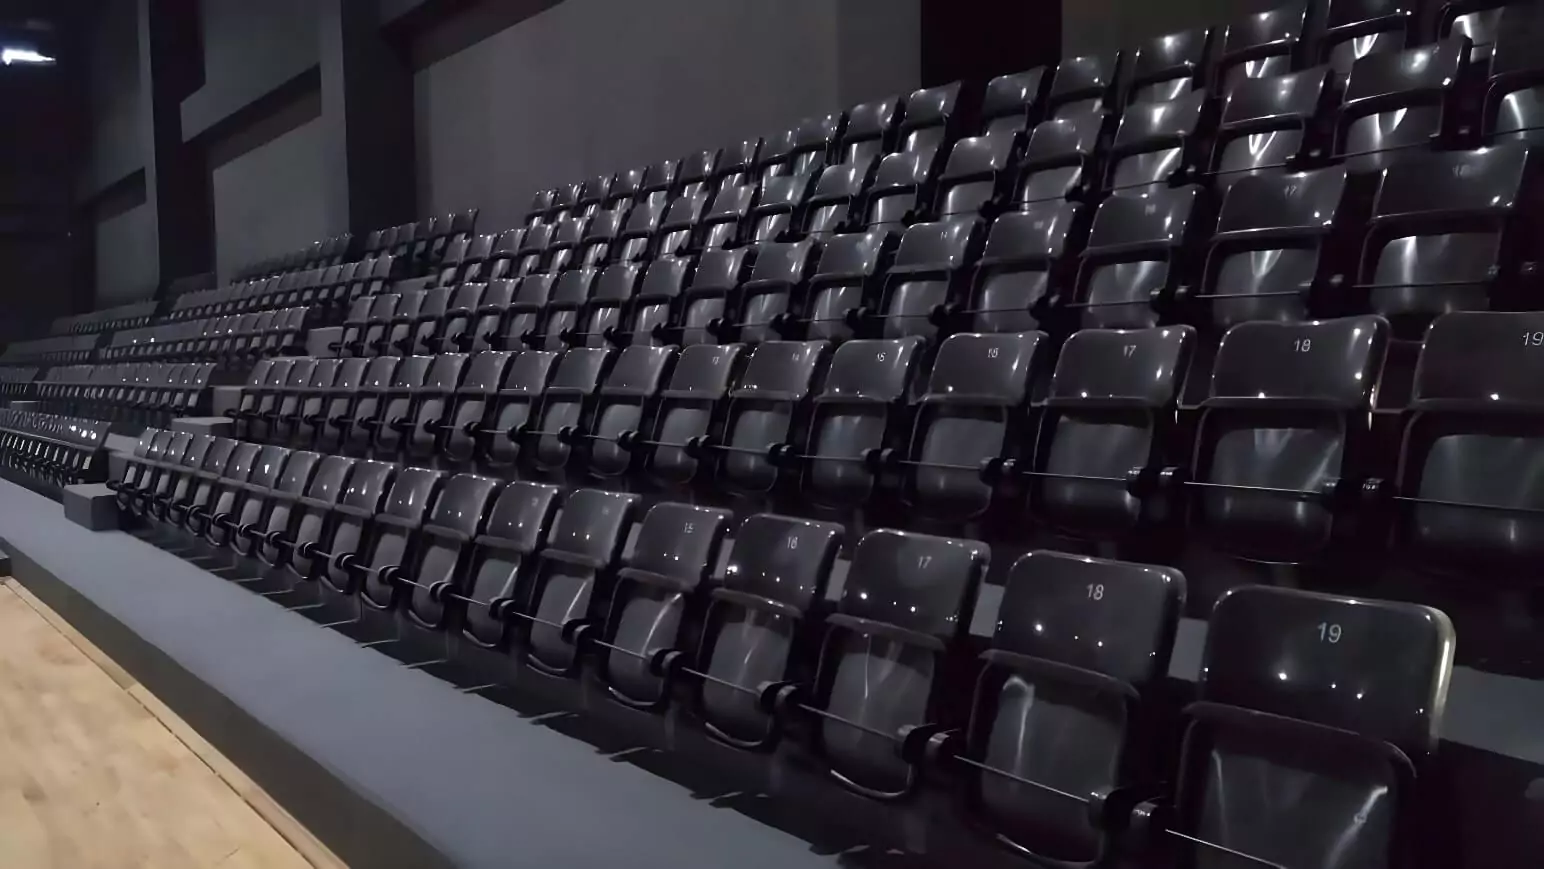 Arena Seating Manufacturer and Supplier Image